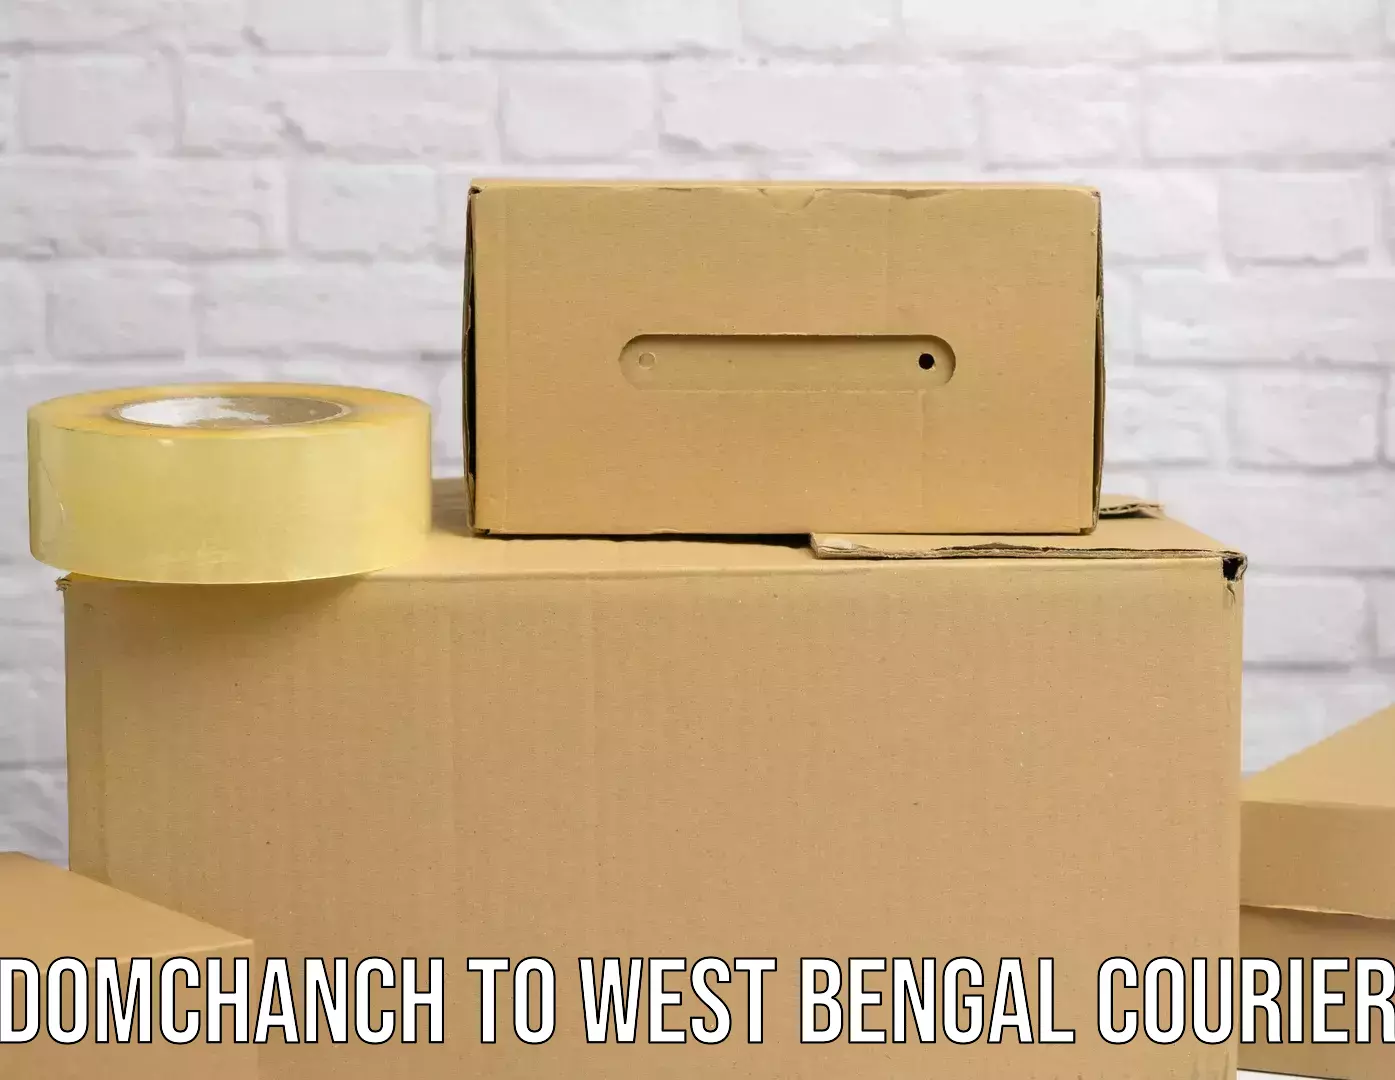 Track and trace shipping Domchanch to West Bengal